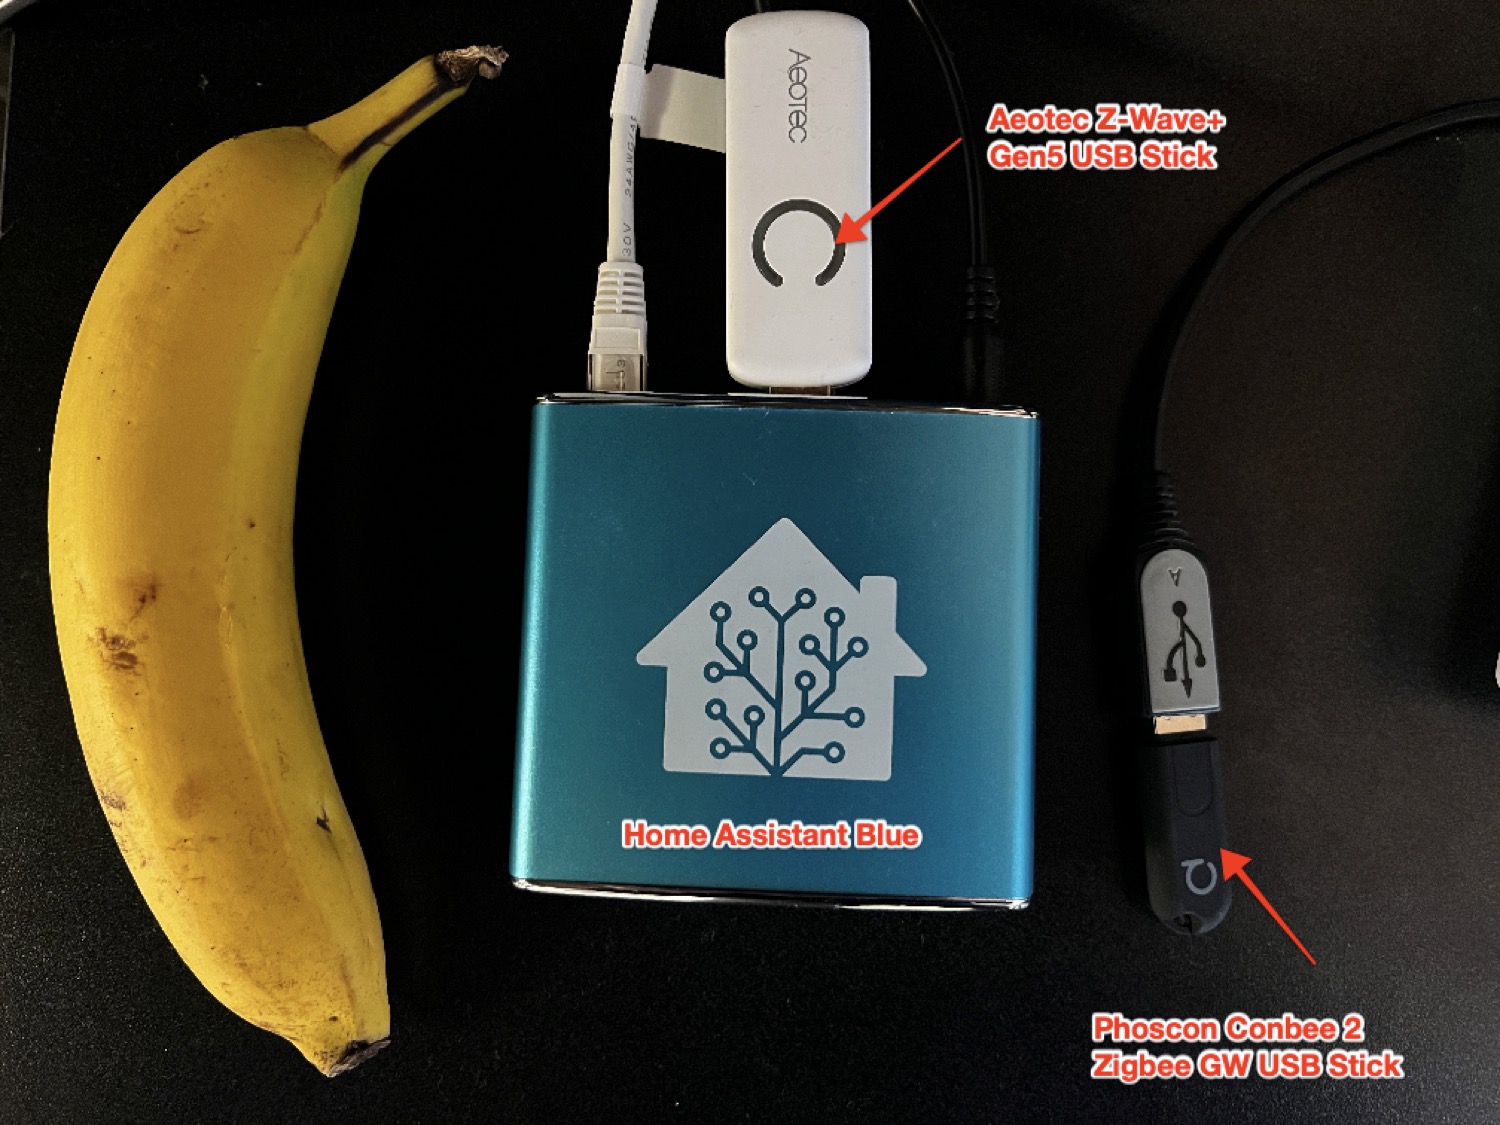 Home Assistant Blue, banana for scale.